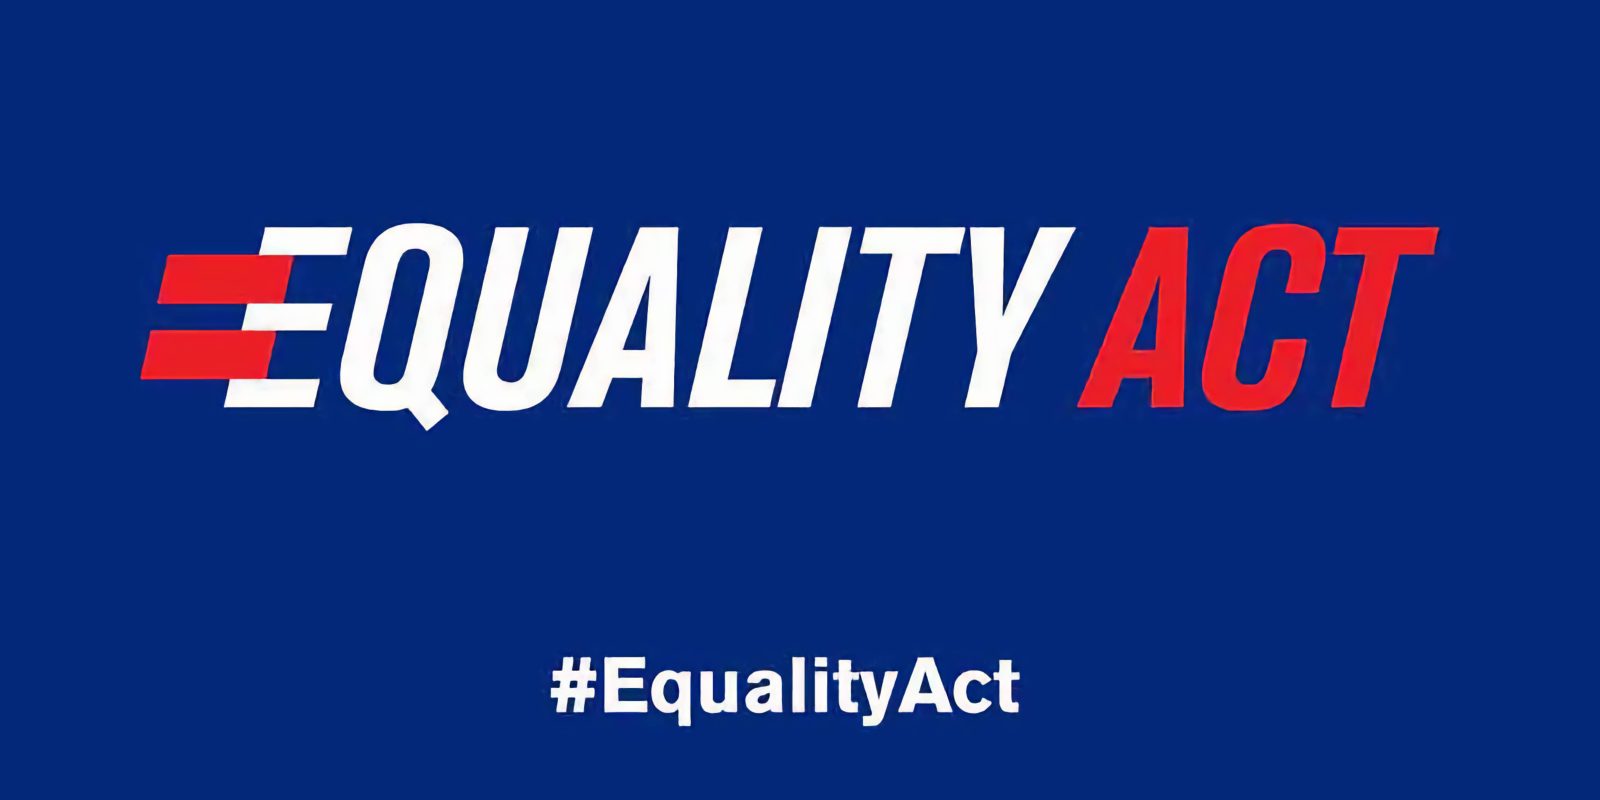 Apple Tim Cook Equality Act support